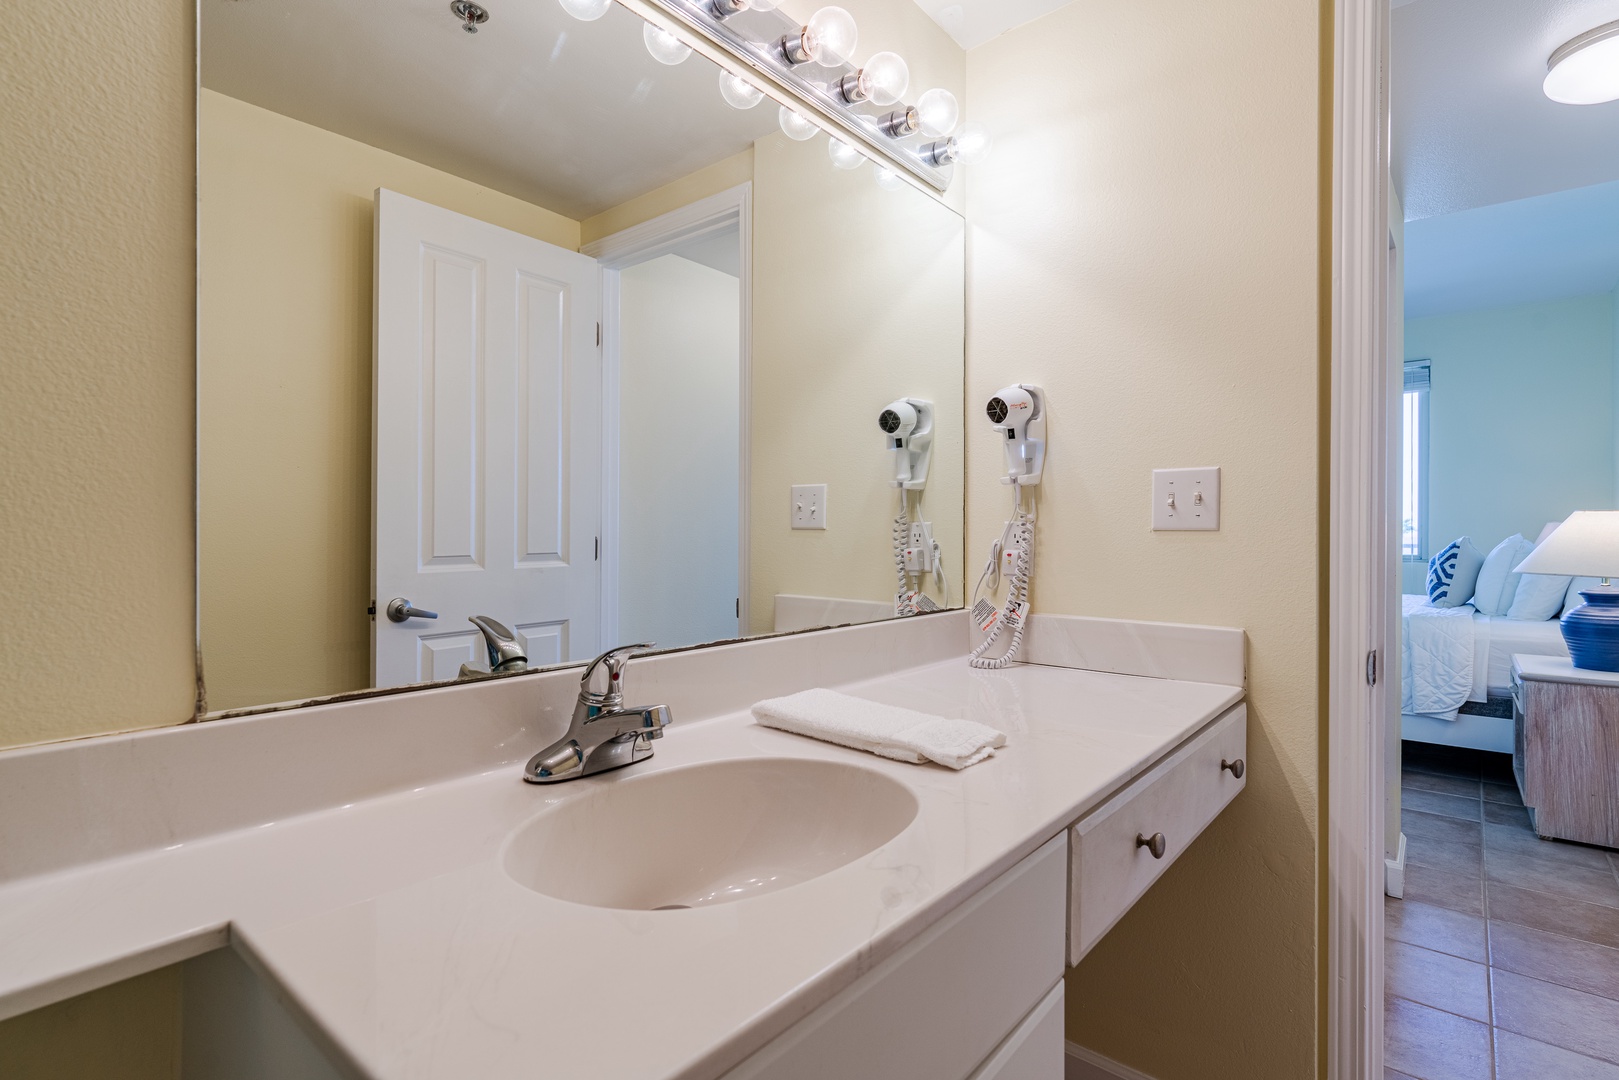 Extra vanity space to give multiple guests areas to get ready